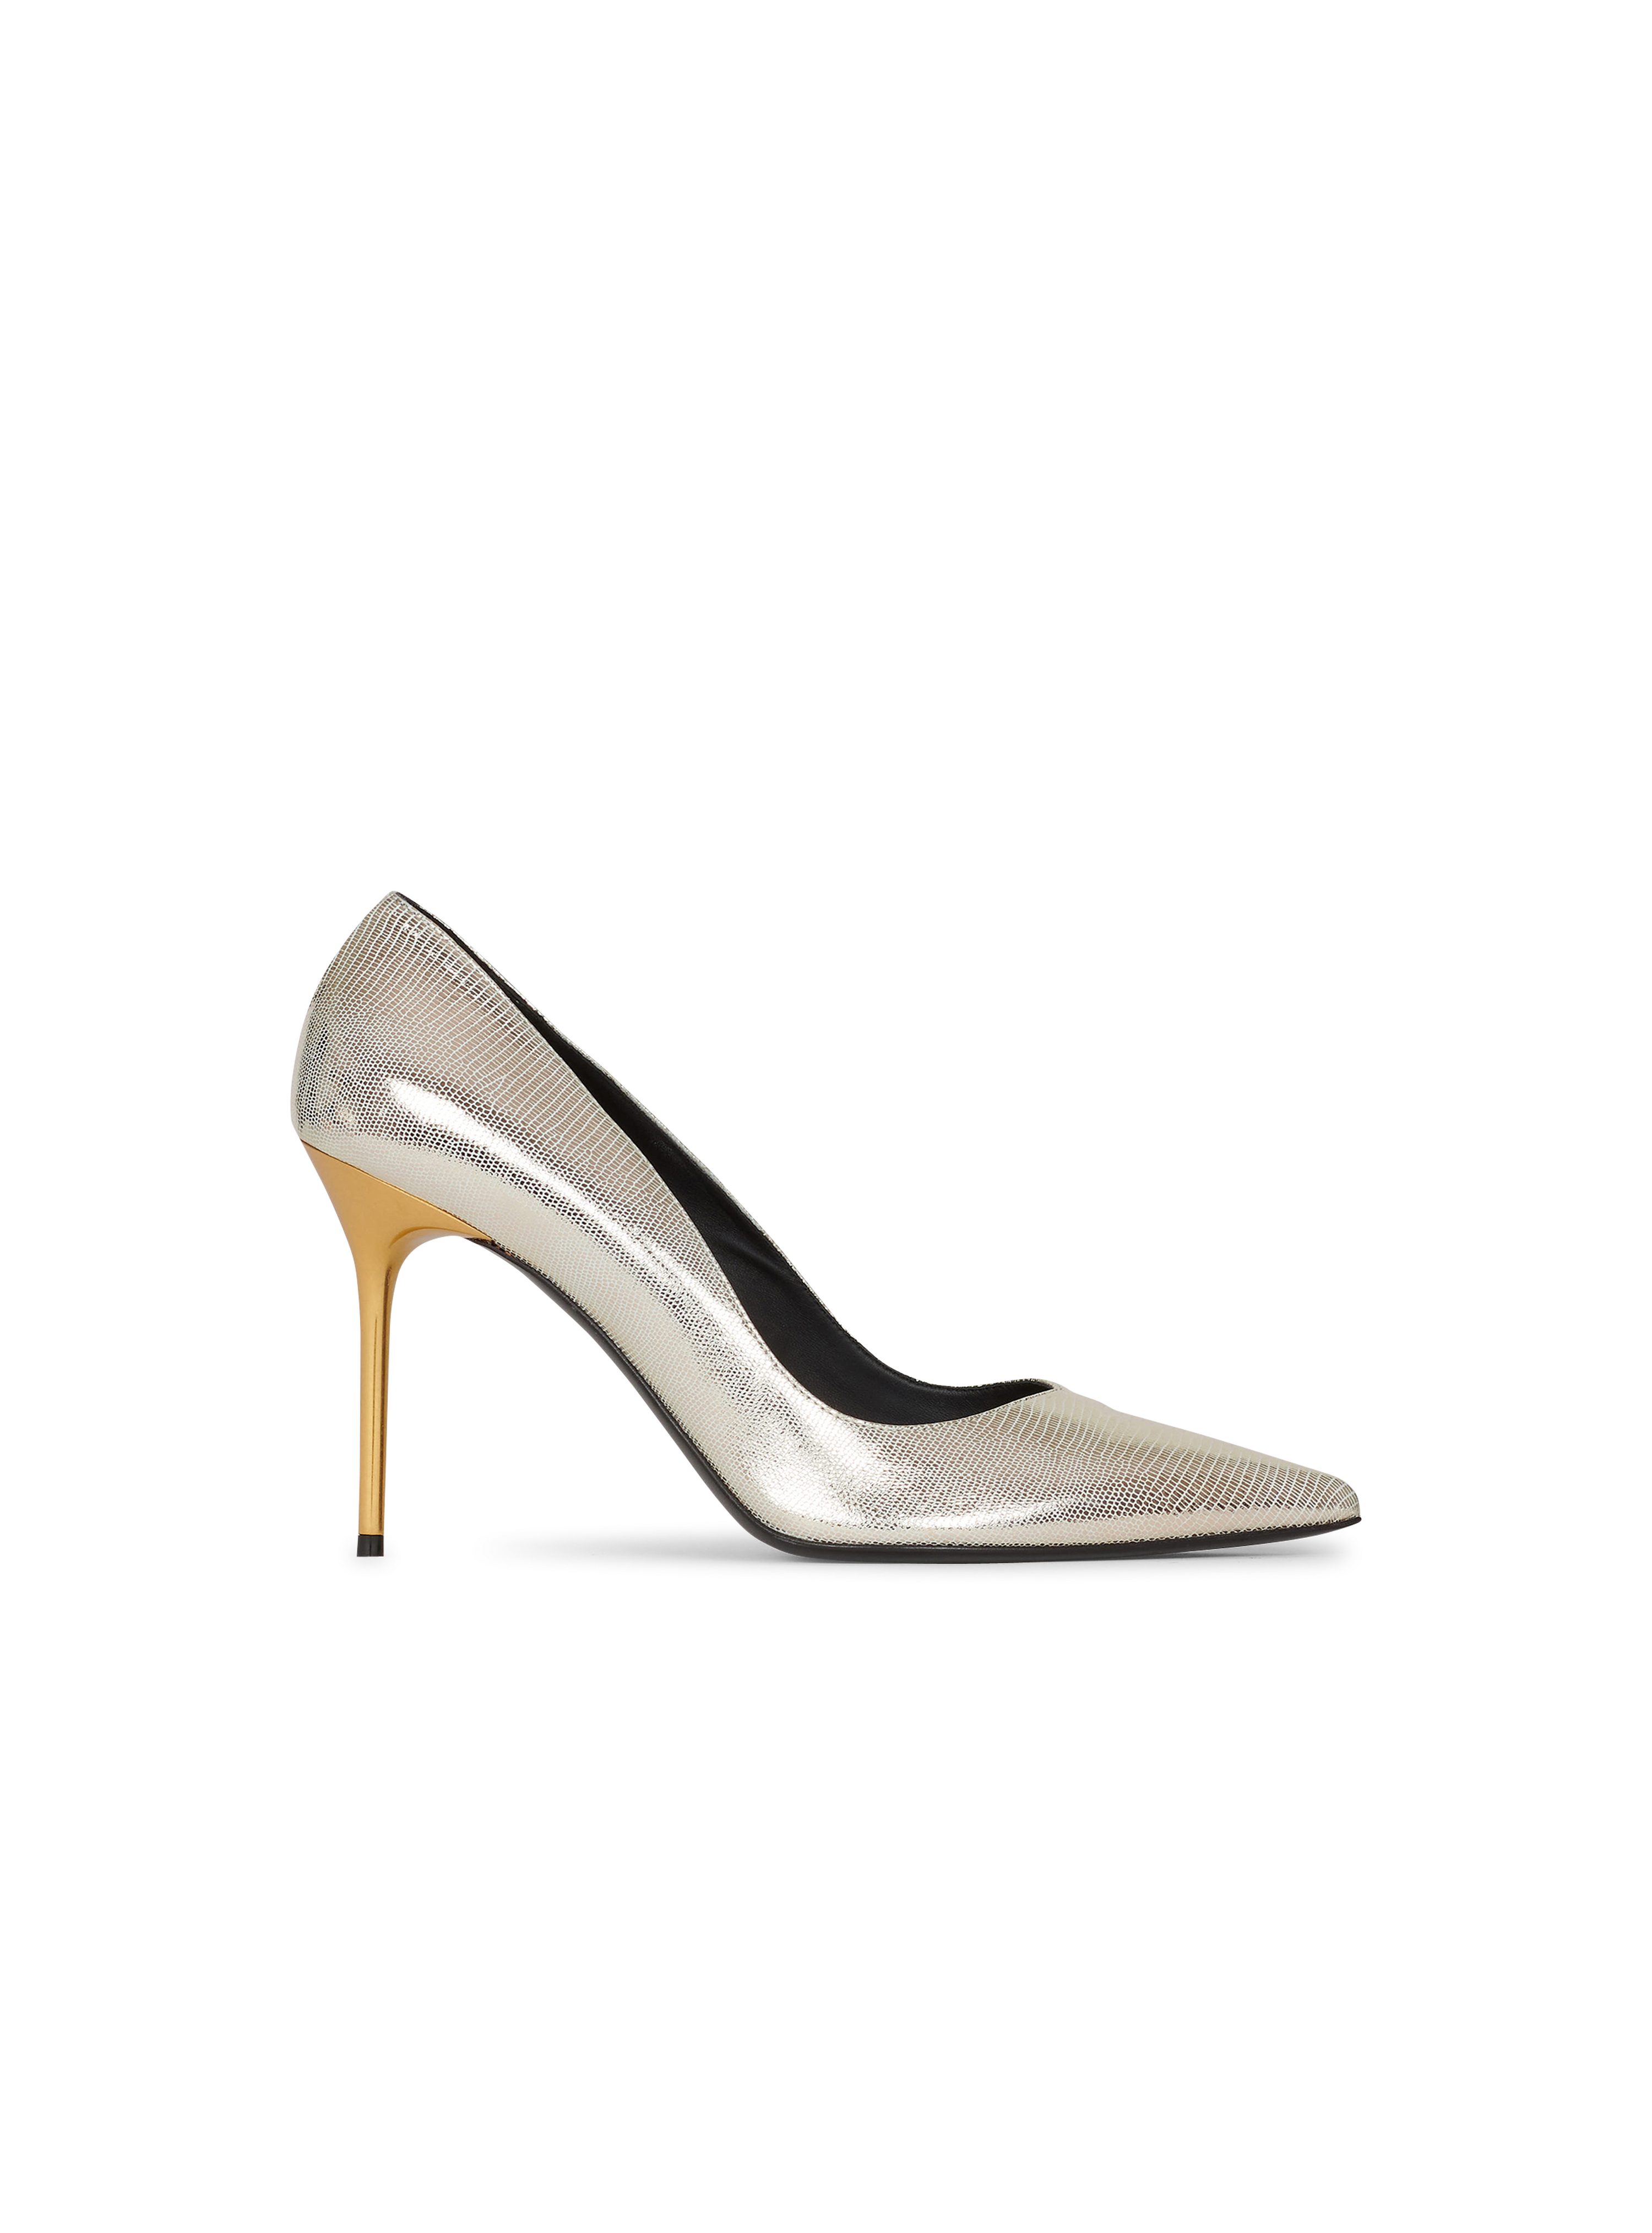 Reptile-effect leather Ruby pumps, gold